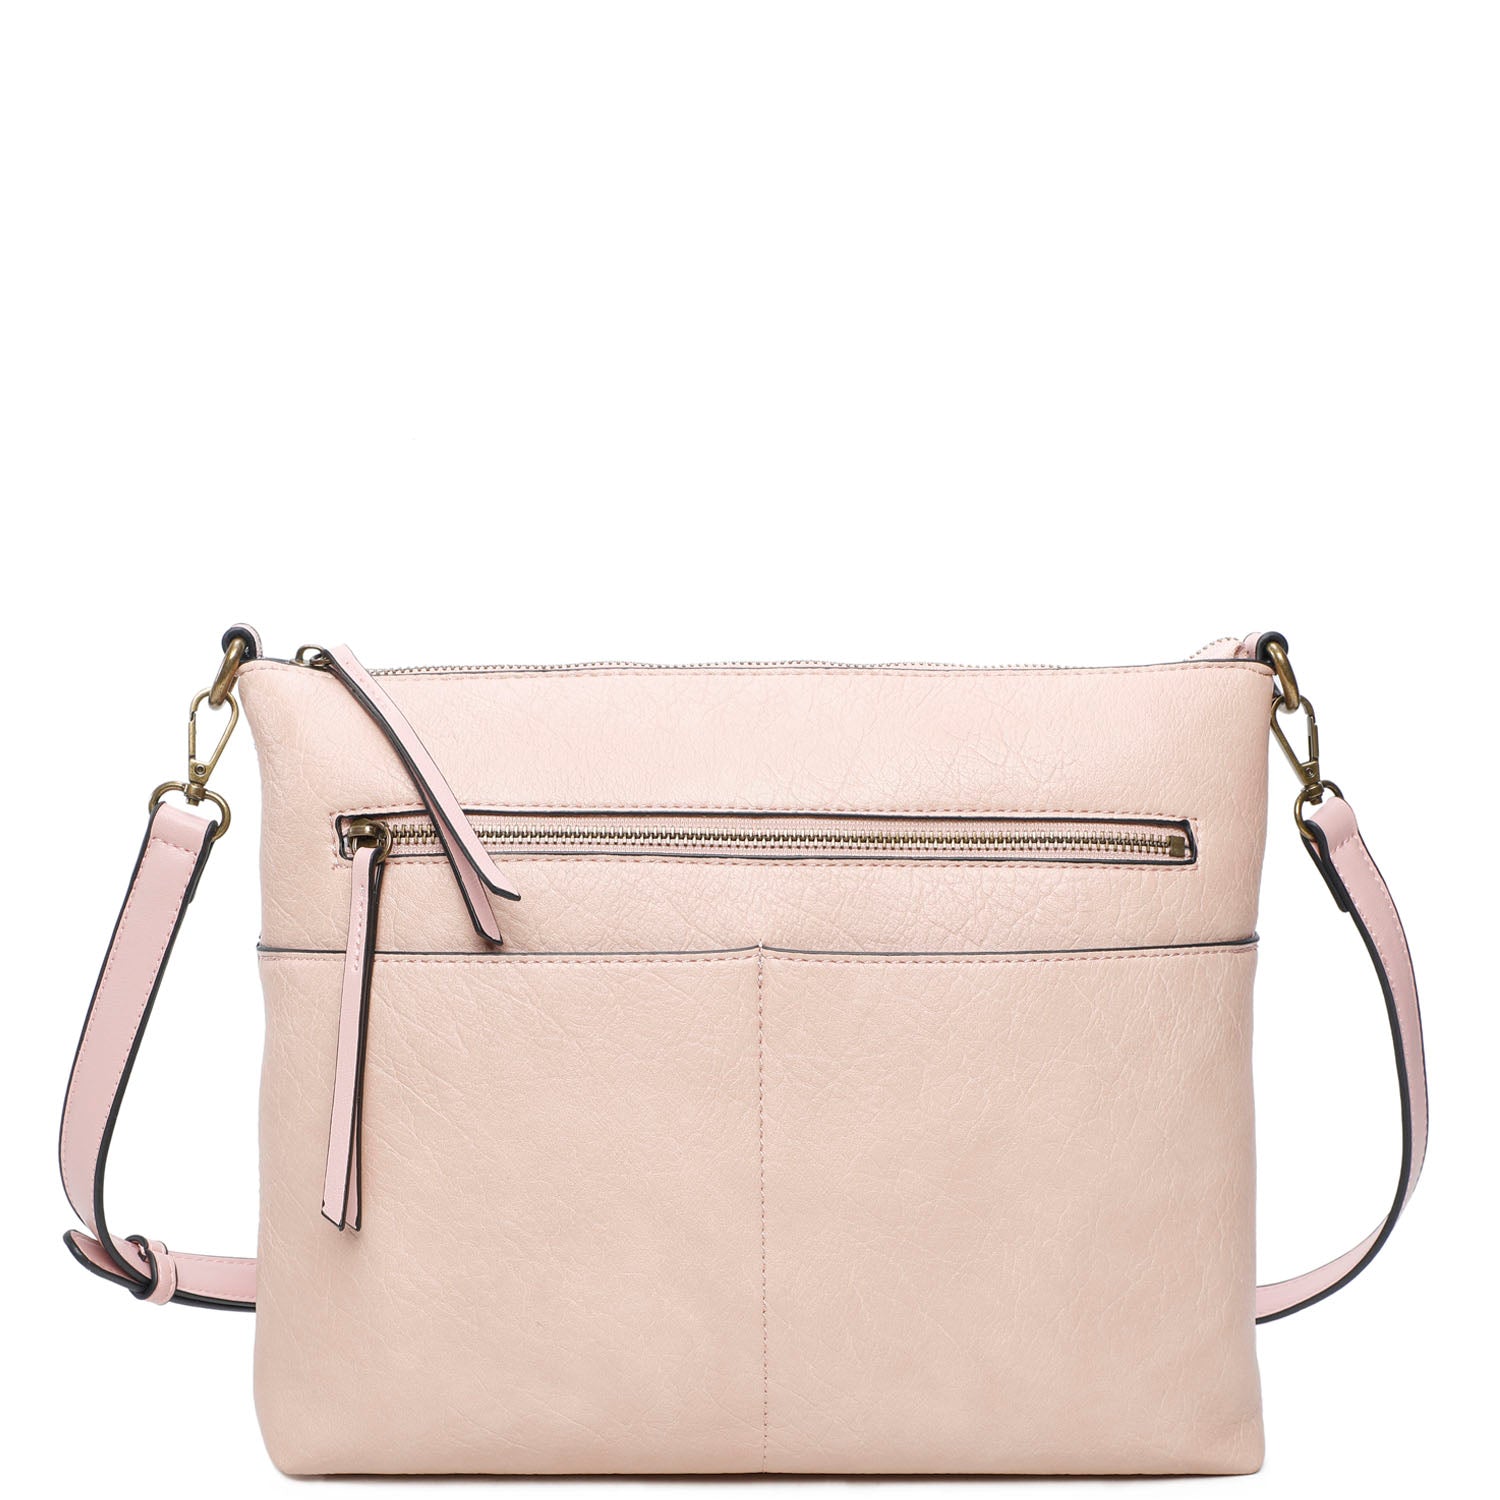 Fossil's Jolie Crossbody Purse Is Up to 40% Off at Amazon